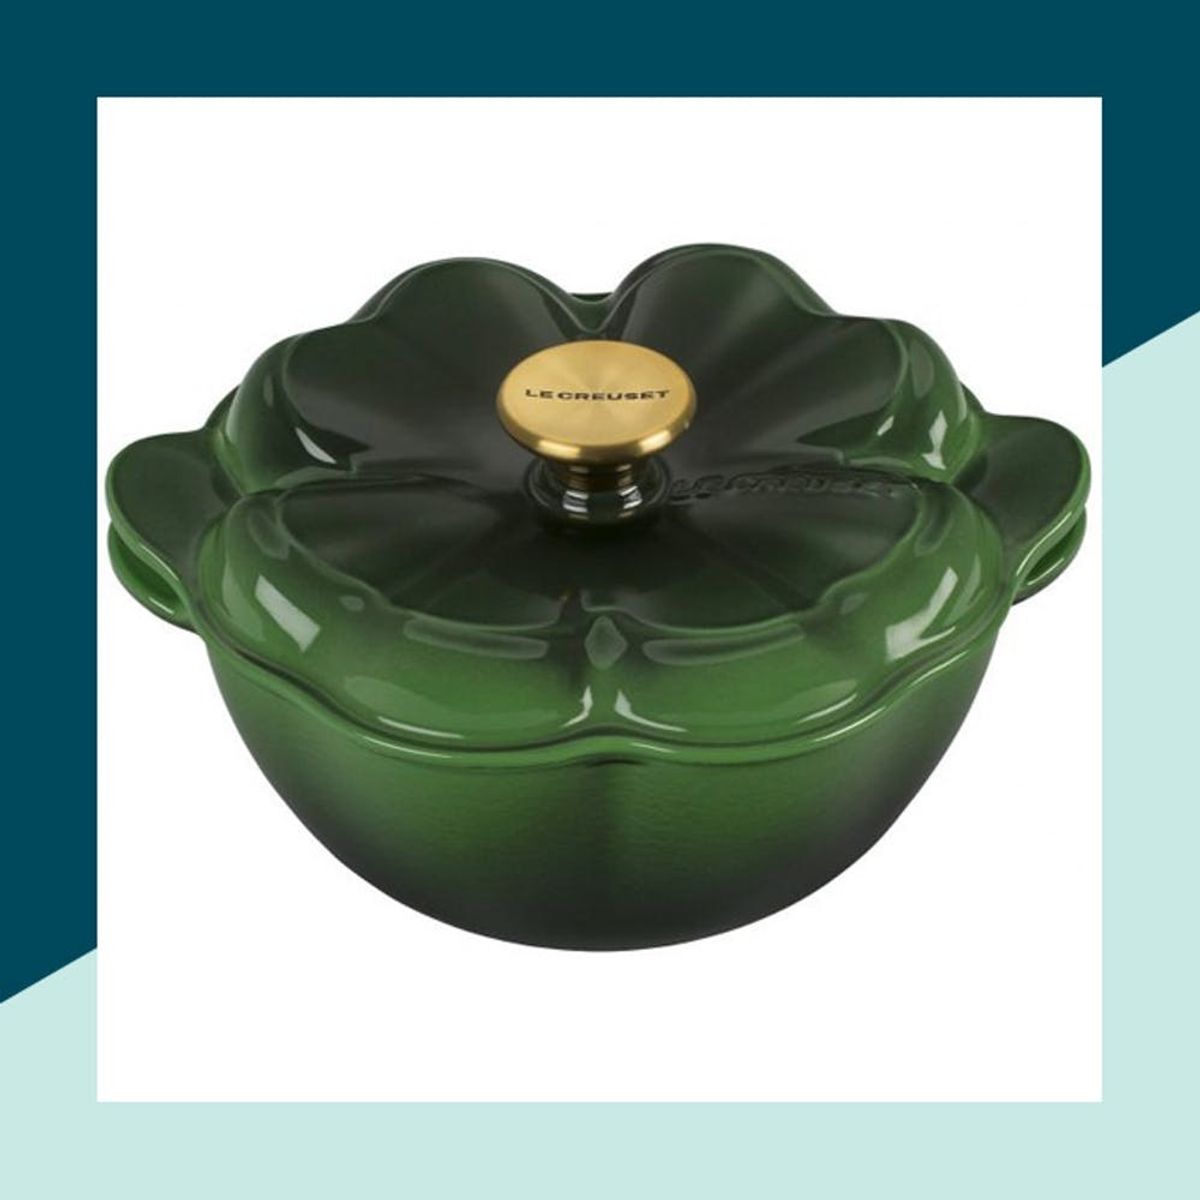 Le Creuset Is Blessing Our Kitchens With a Clover-Shaped Dutch Oven